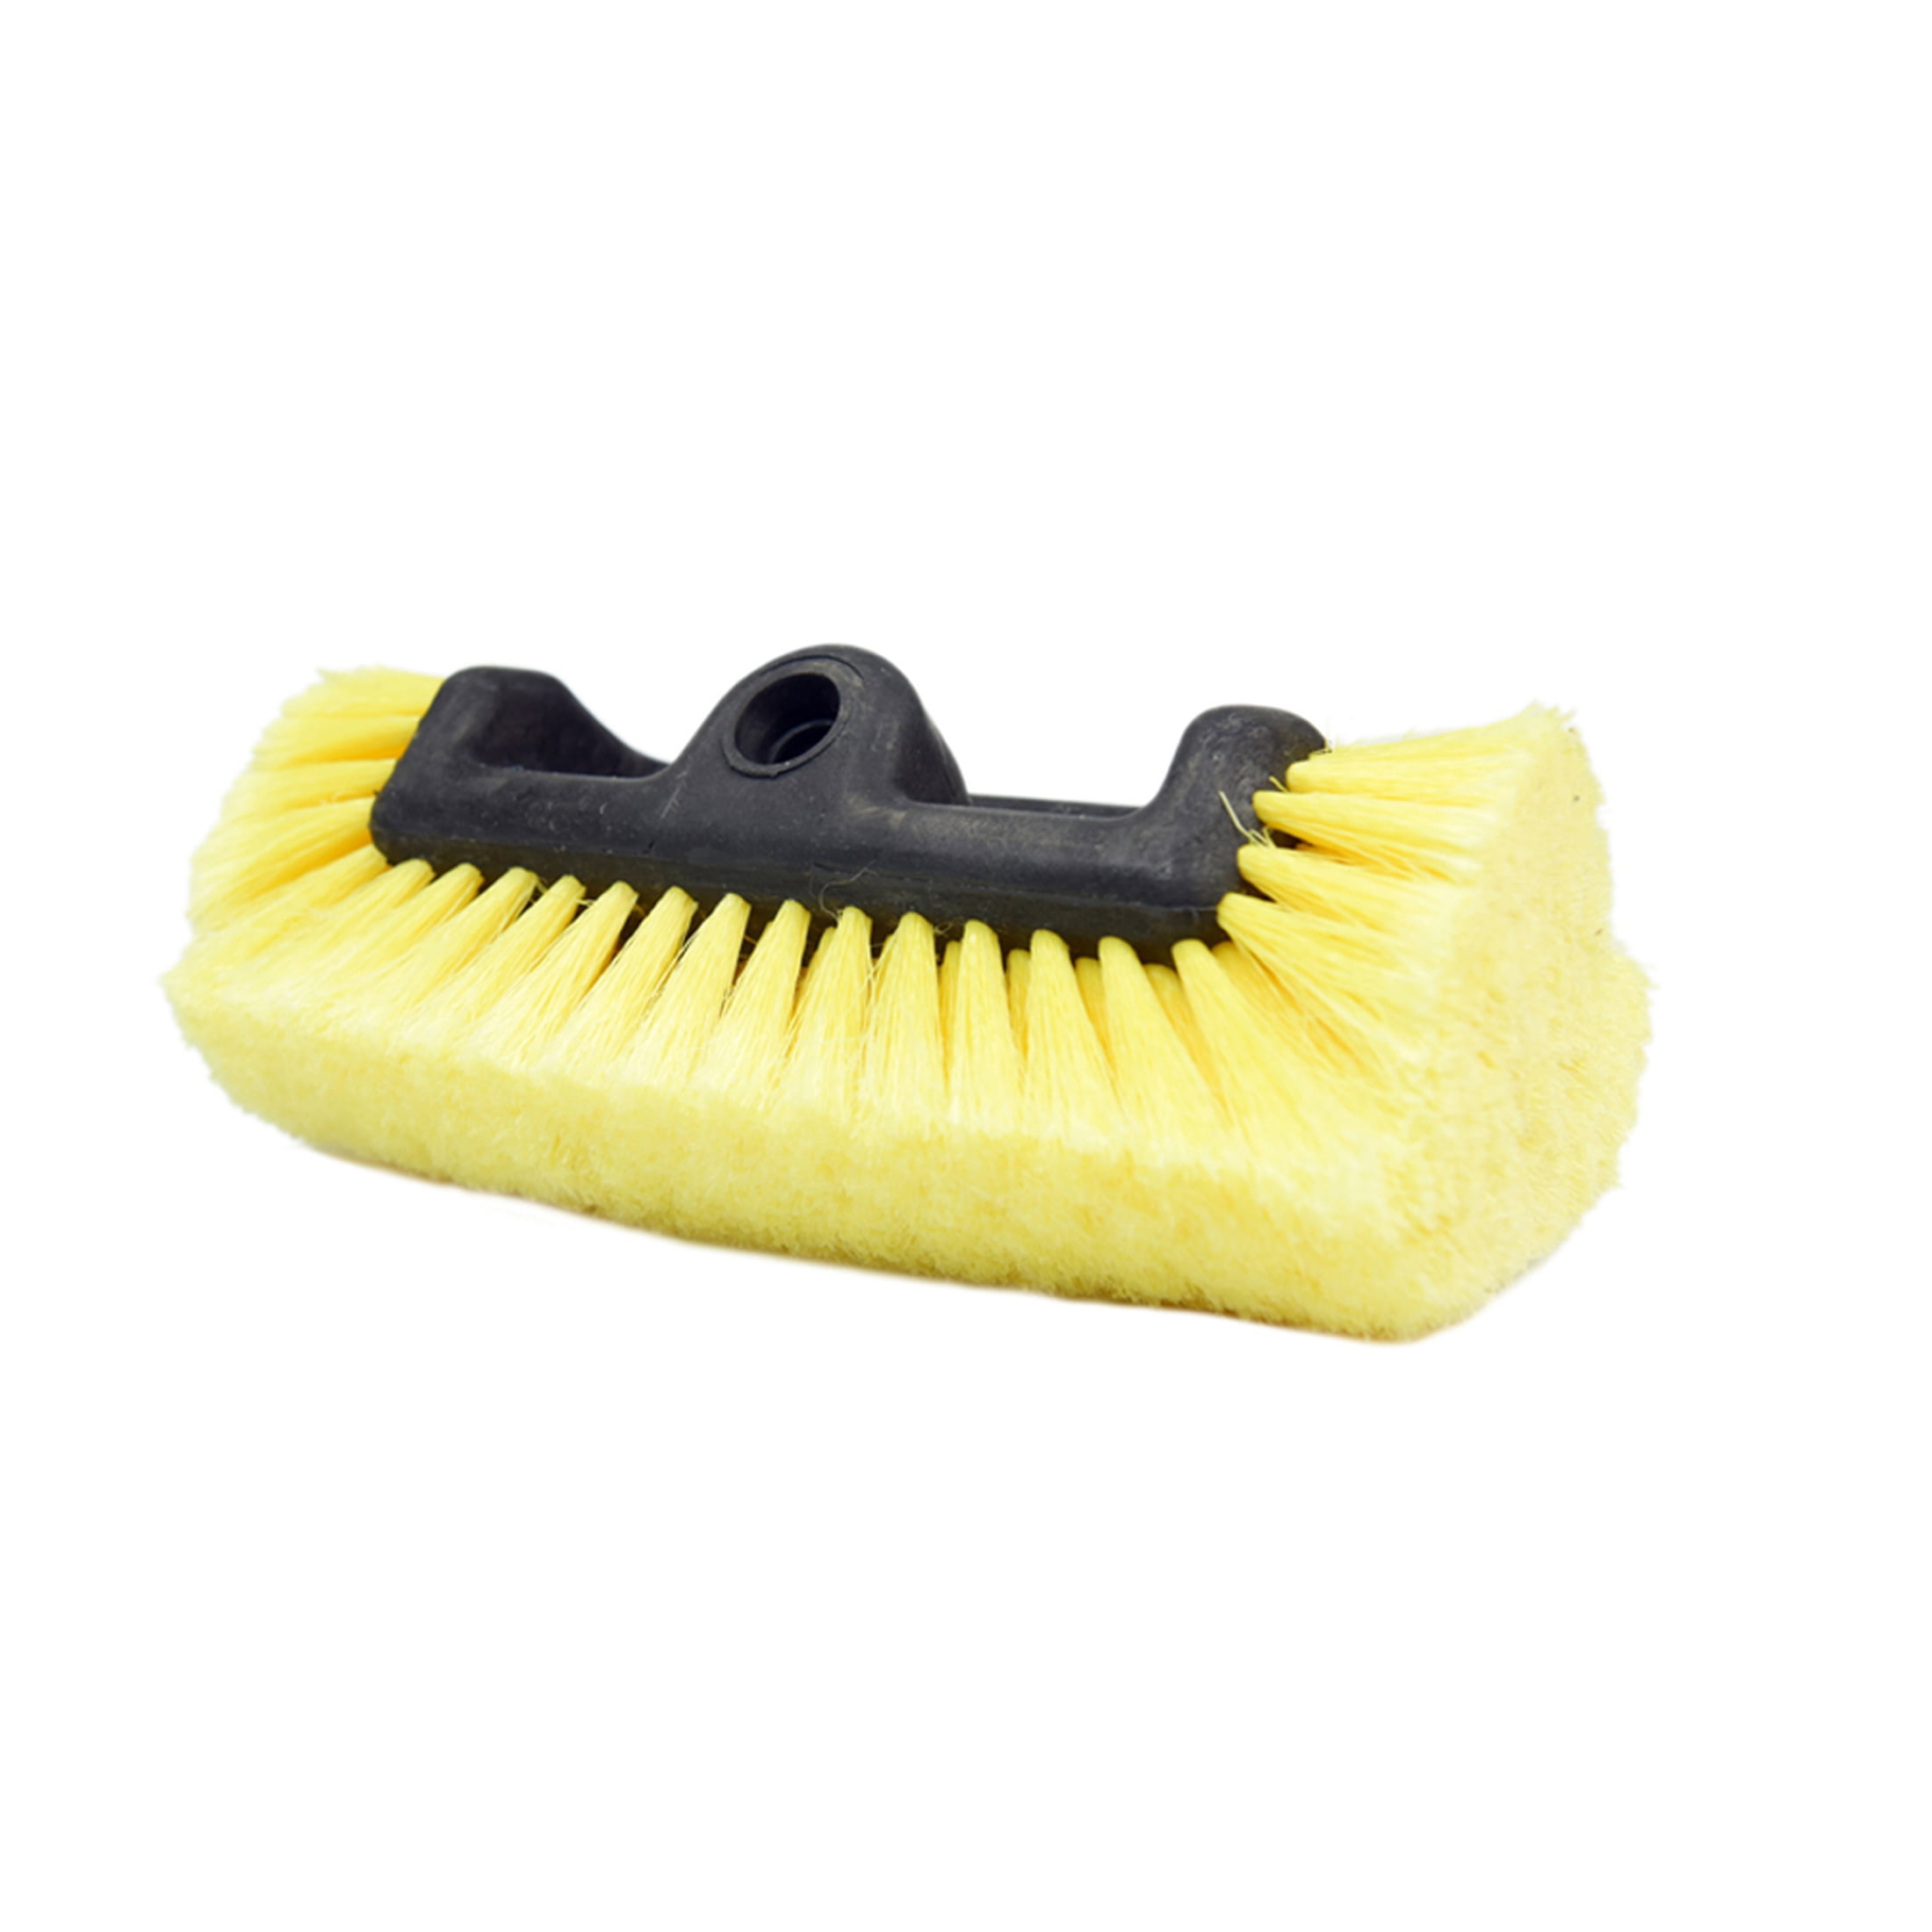 DETAIL DIRECT Truck Wash Brush 14-Inch with Extra Soft Bristles